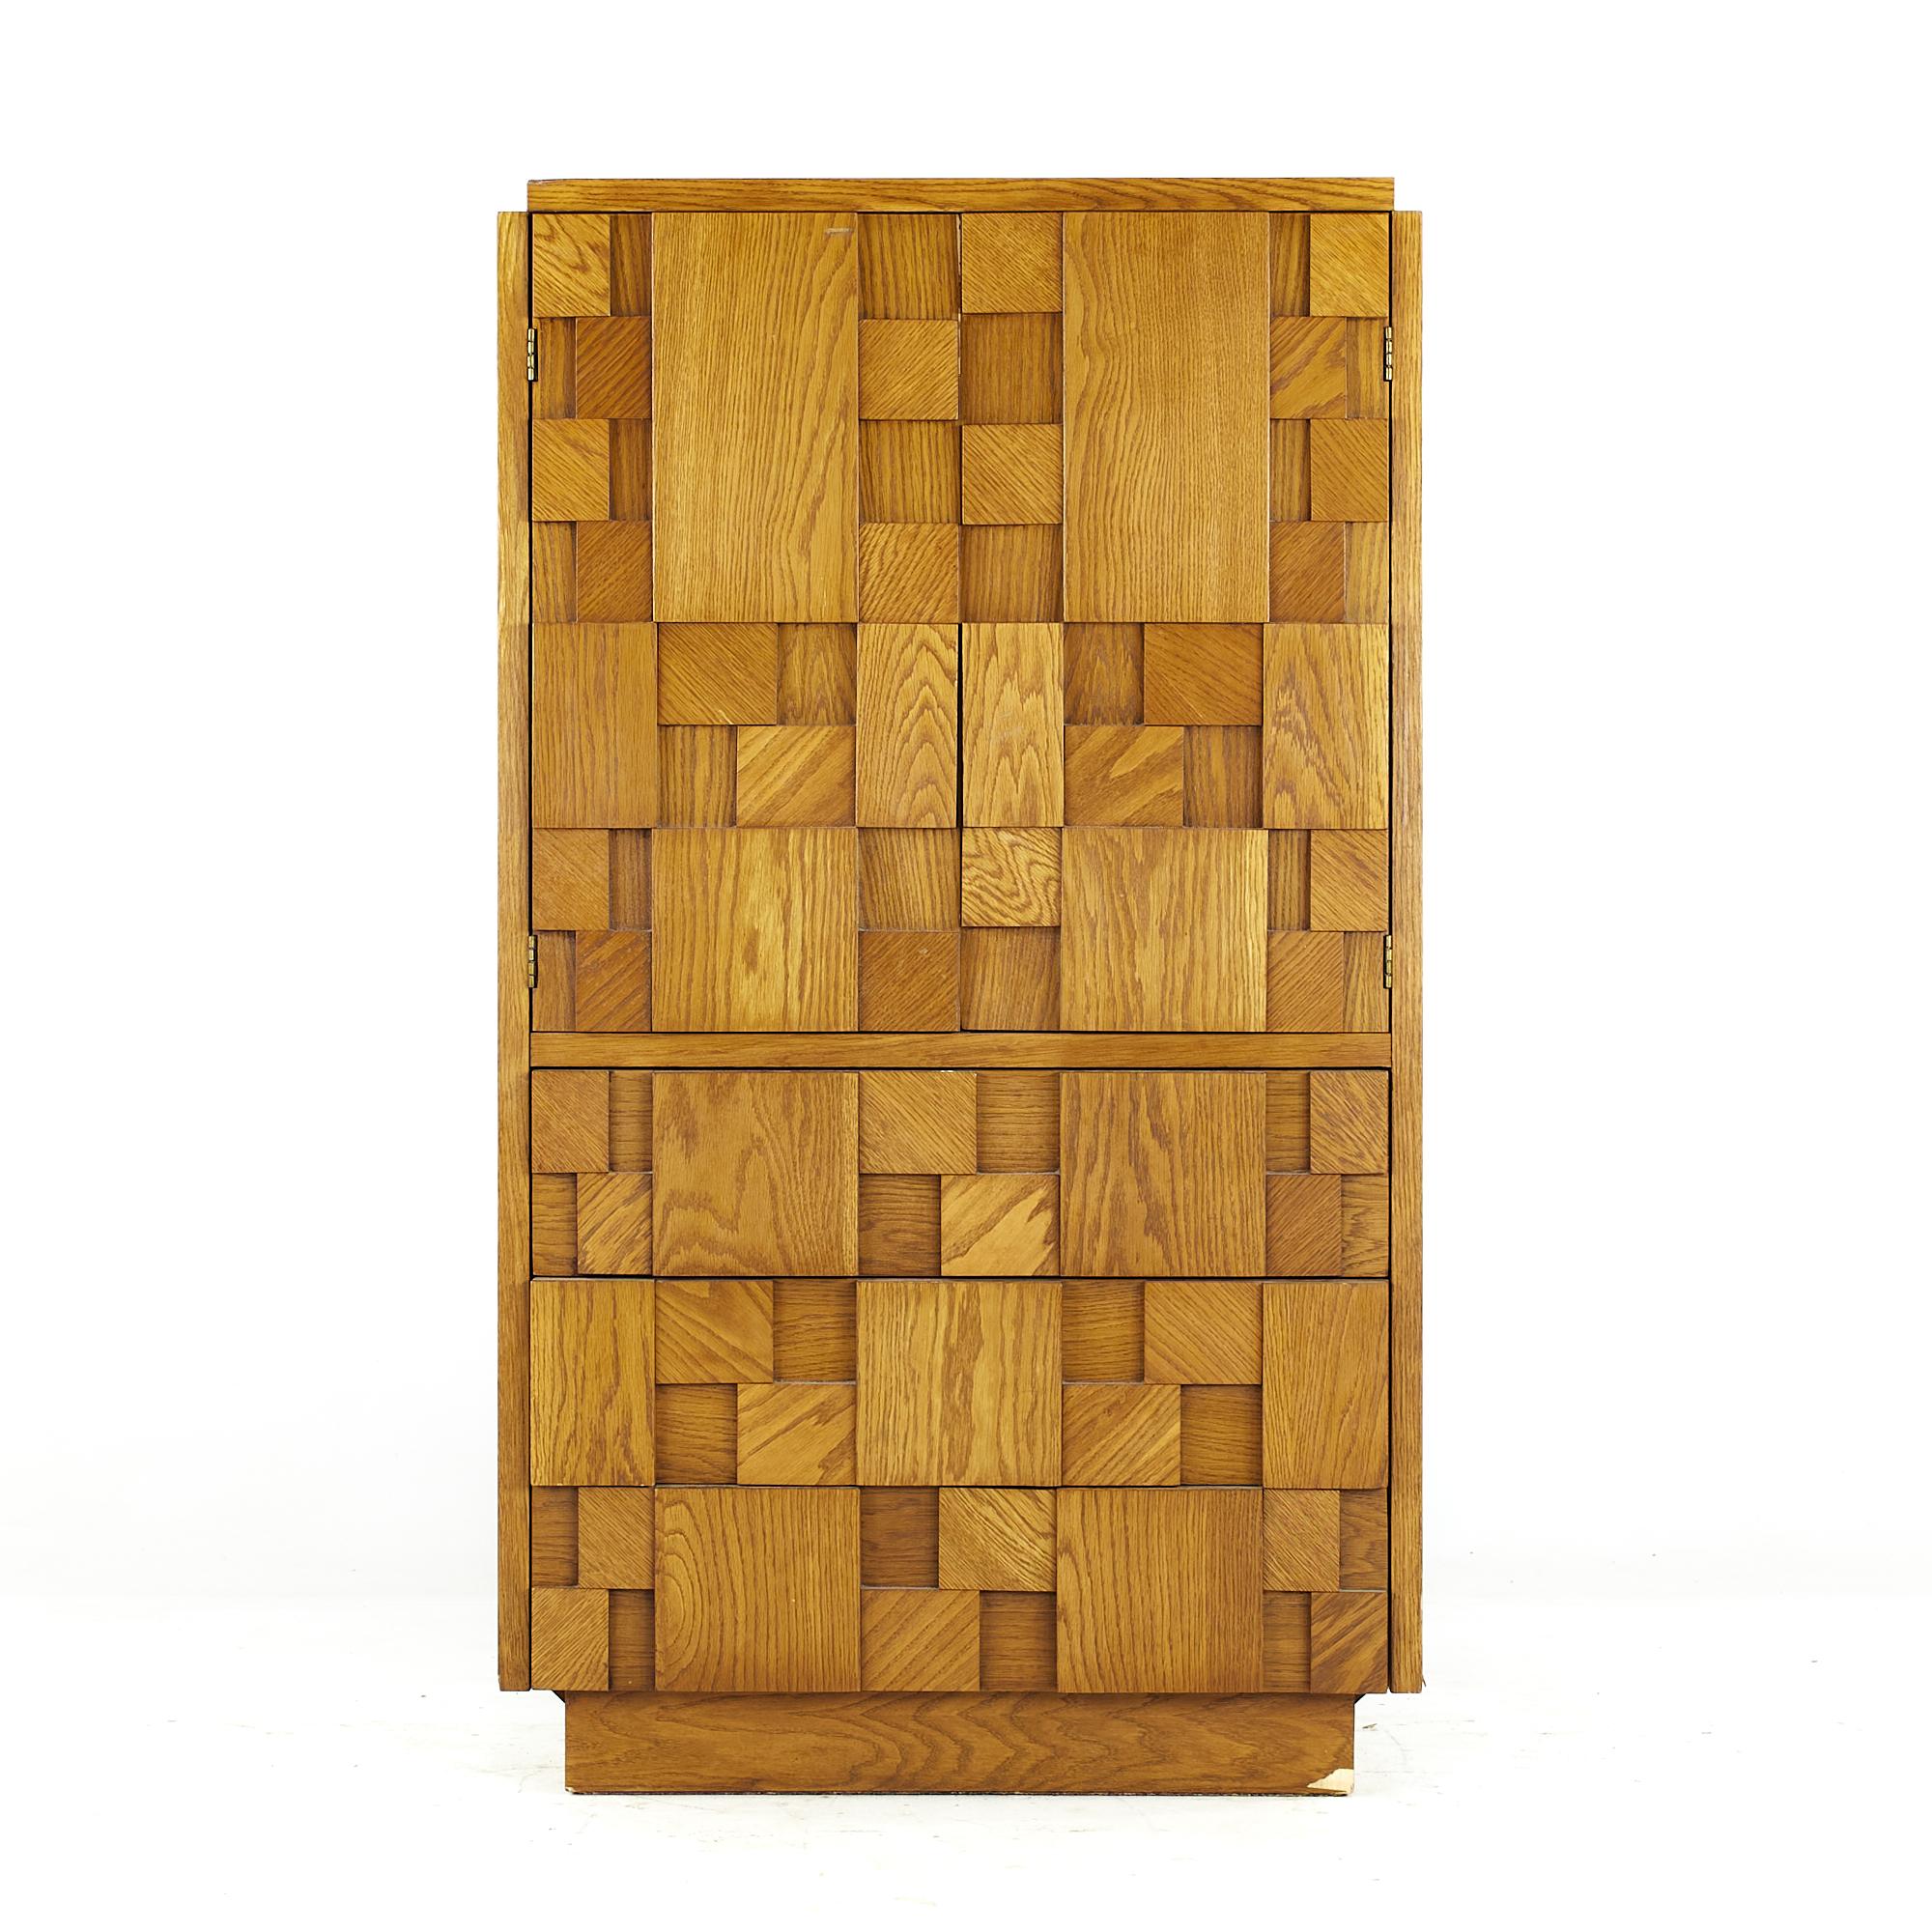 Lane Staccato Brutalist Mid Century Oak Armoire

This armoire measures: 36 wide x 19 deep x 63.25 inches high

All pieces of furniture can be had in what we call restored vintage condition. That means the piece is restored upon purchase so it’s